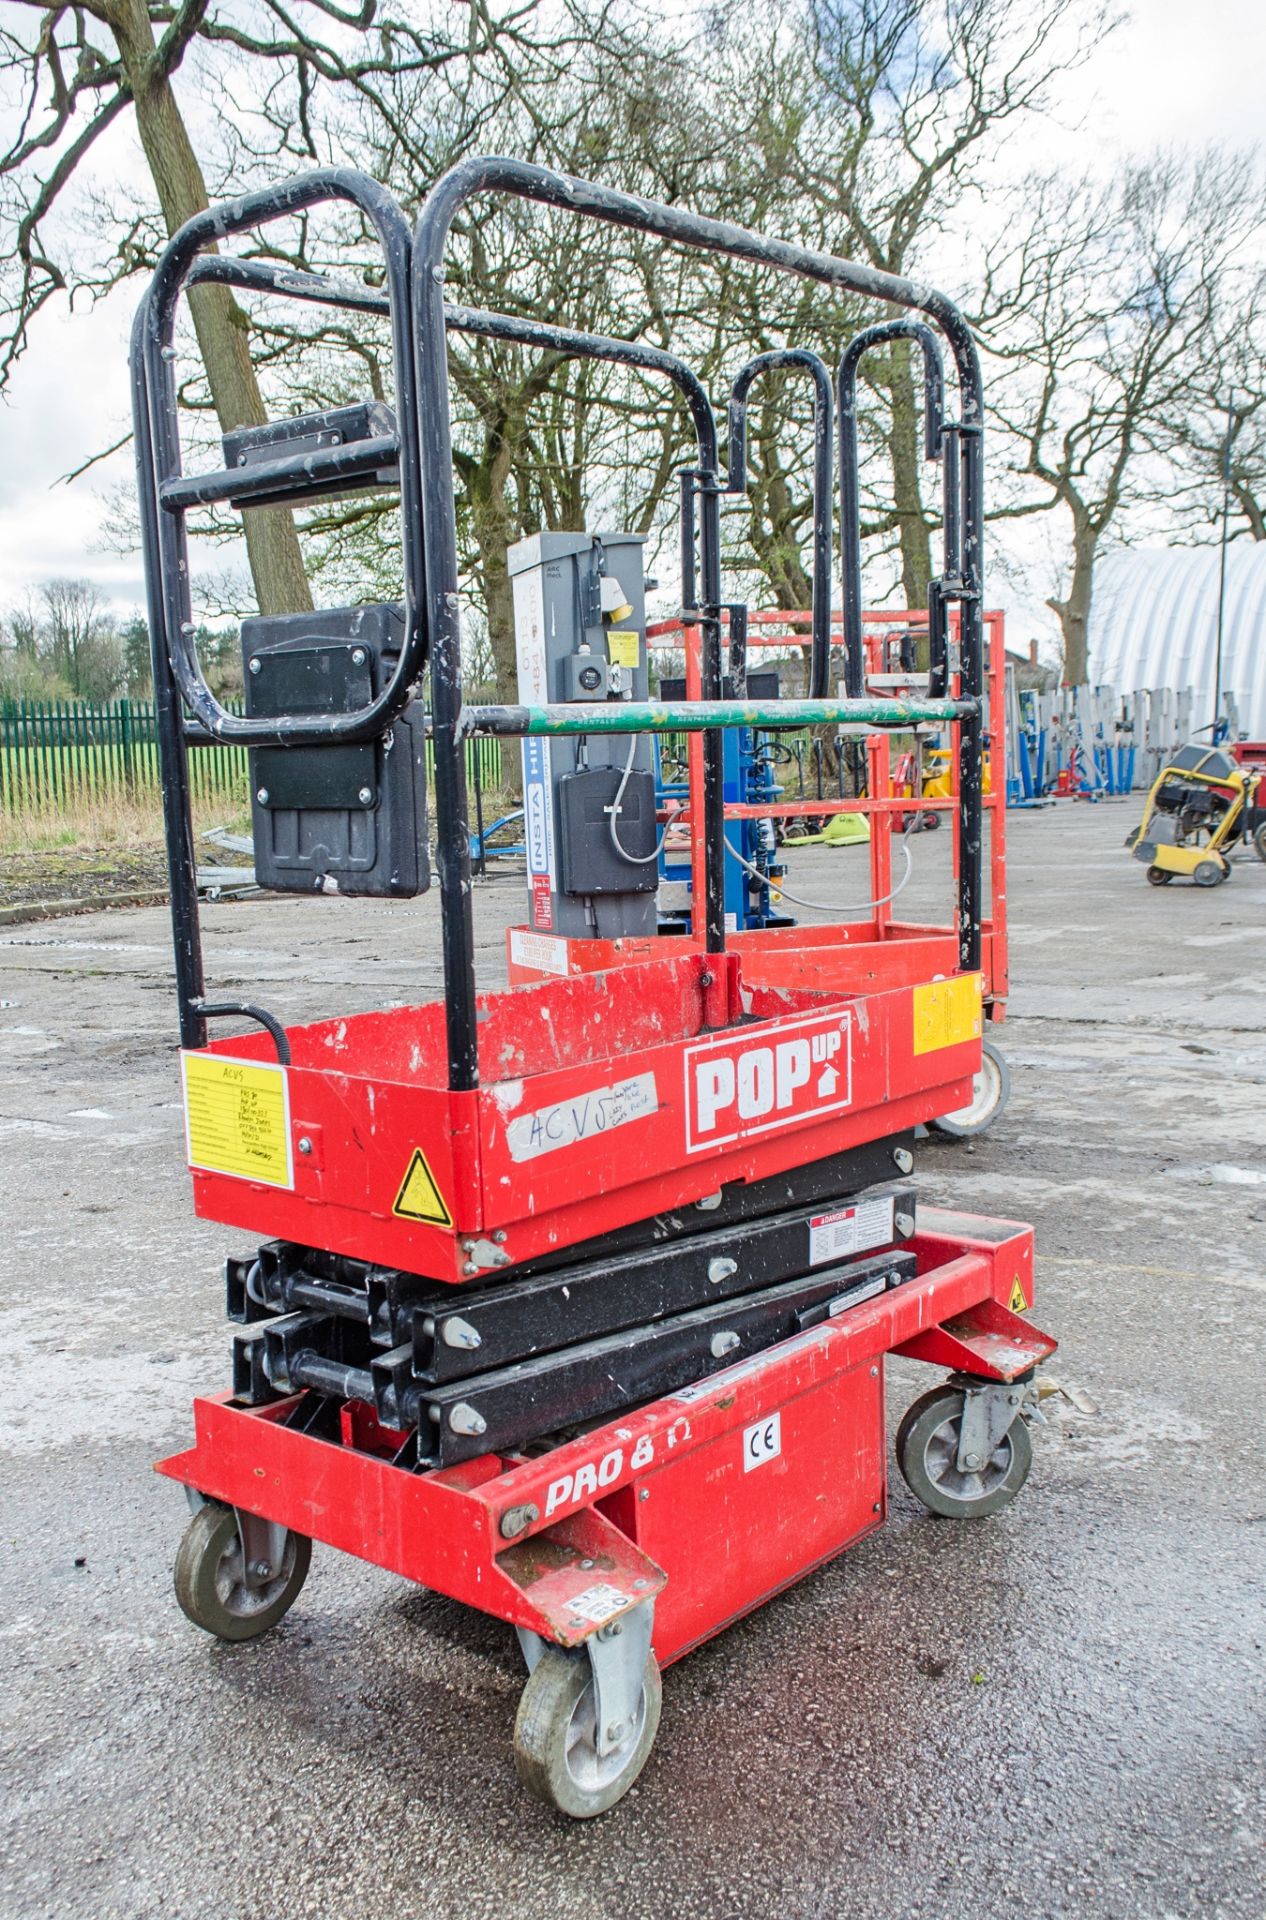 Pop Up Pro 8 battery electric push around access platform A856605 - Image 3 of 6